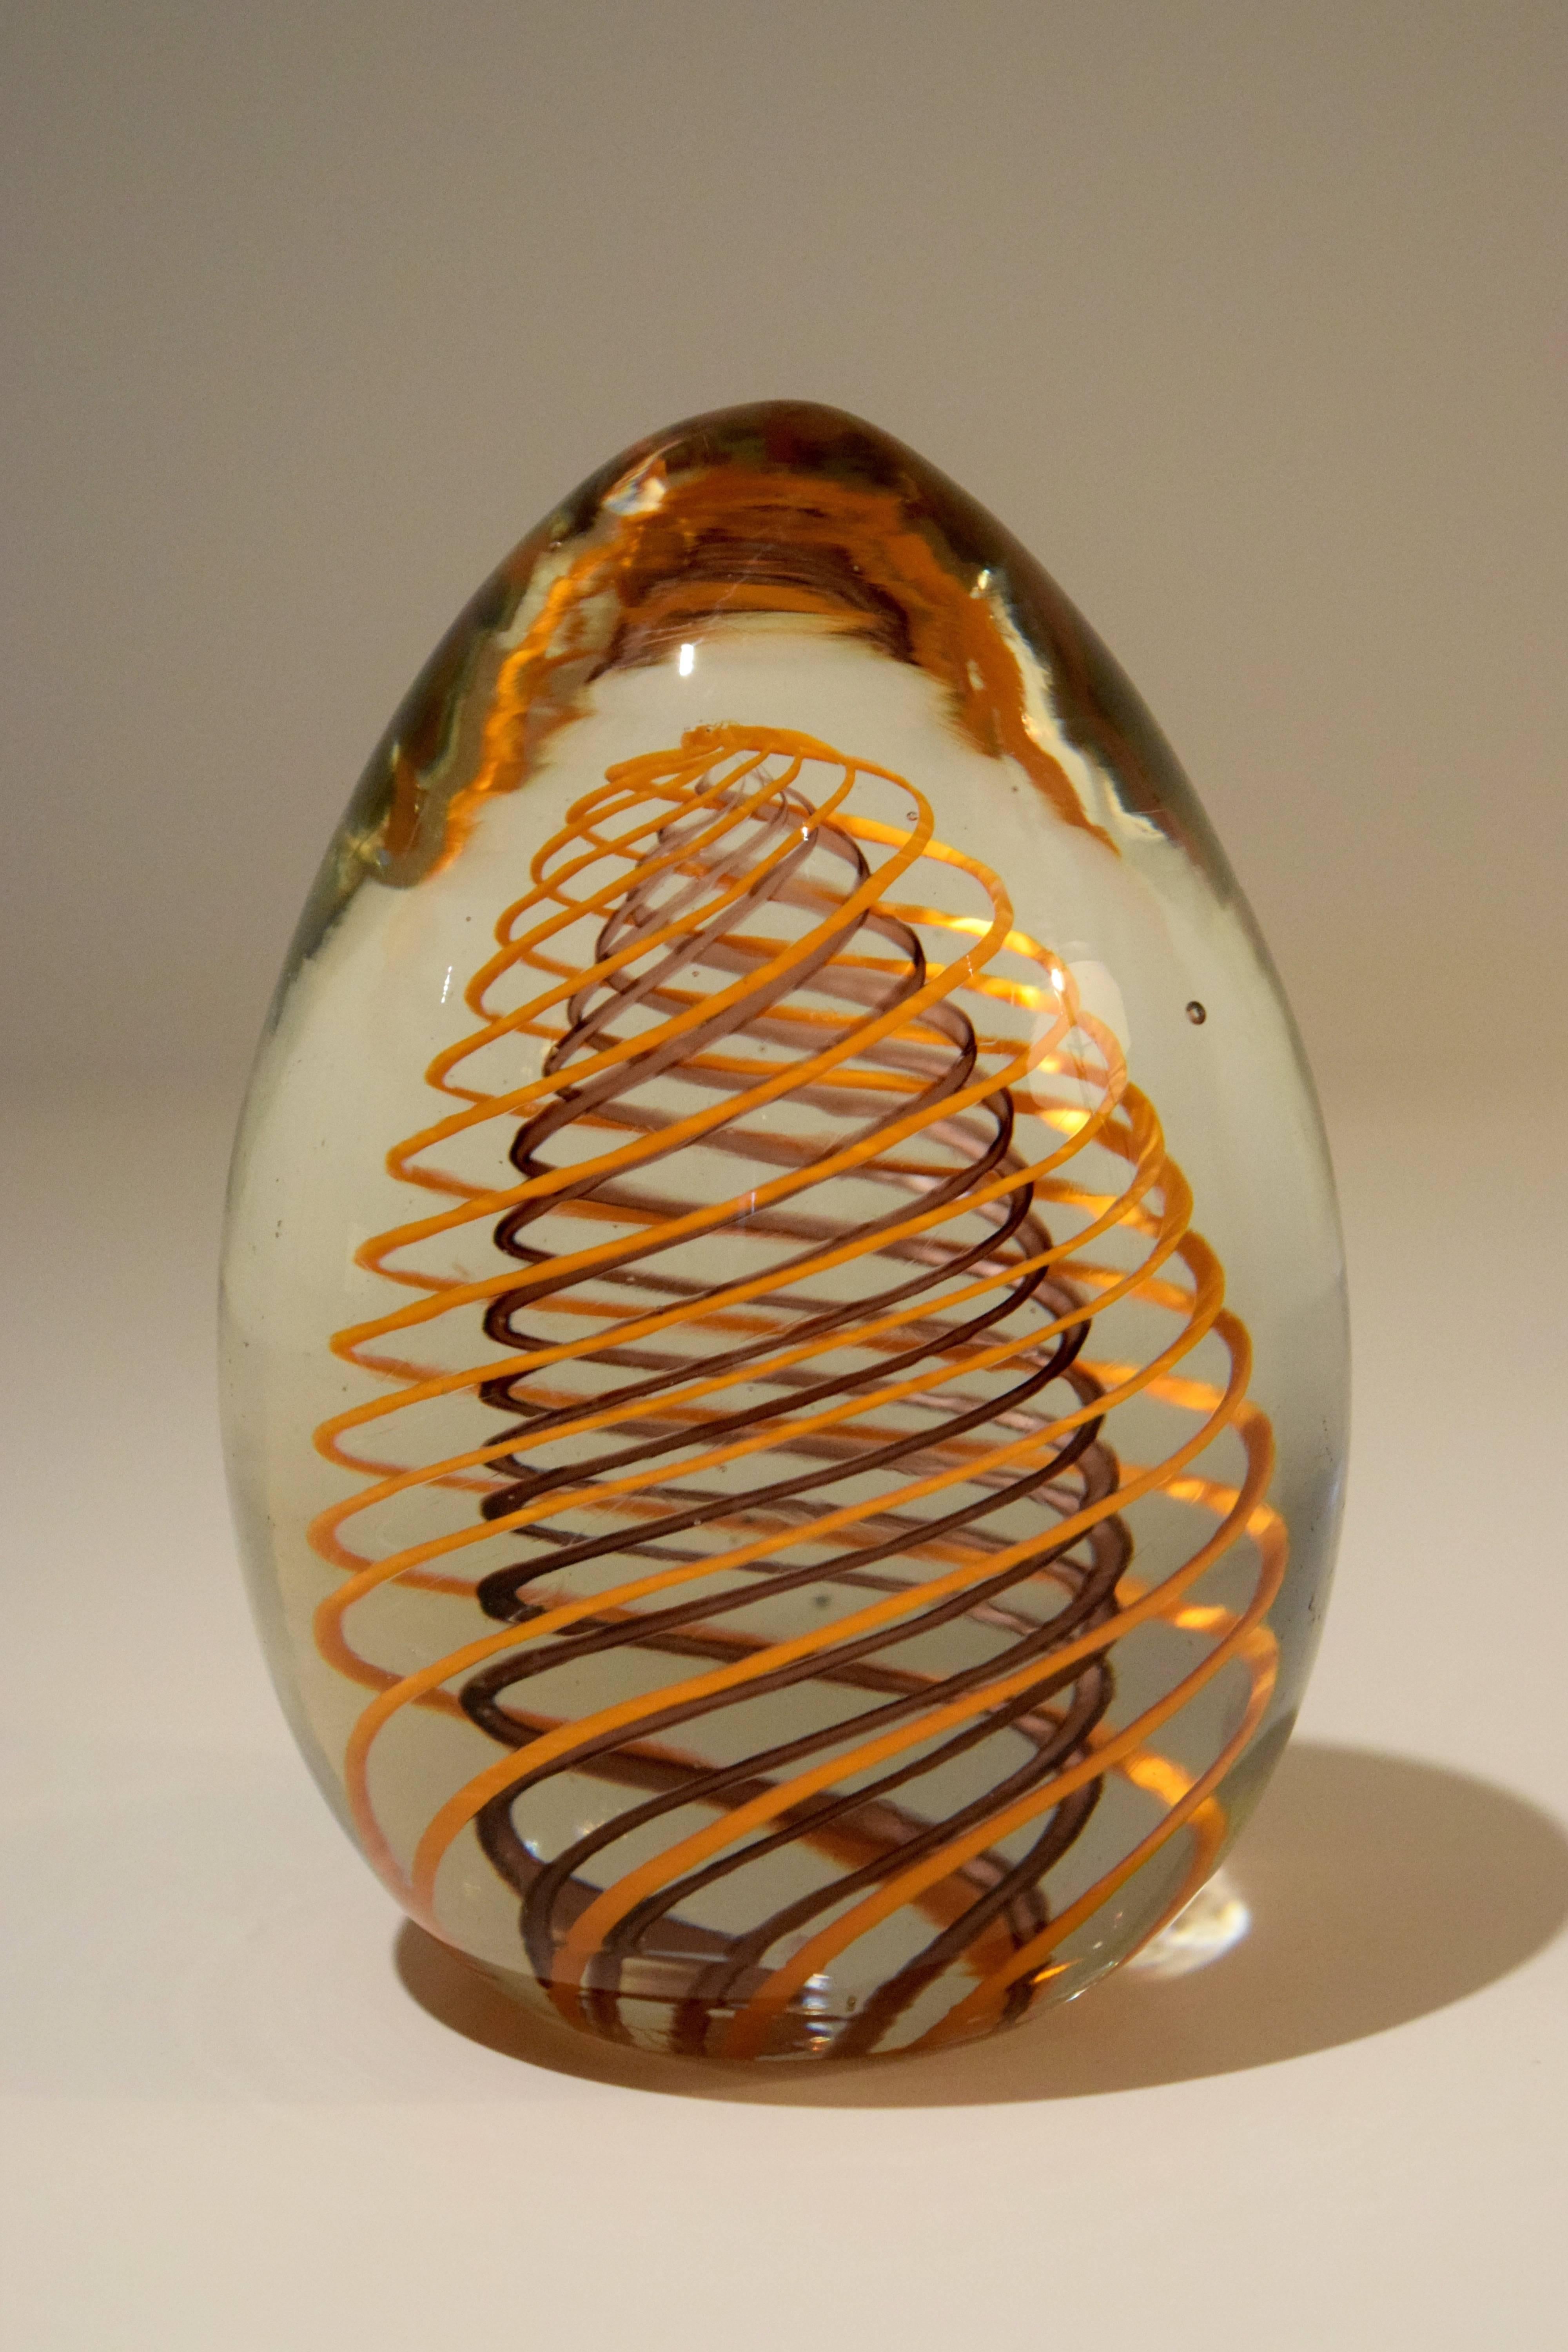 This egg-shaped Venini glass paperweight has a purple spiral encased in an orange spiral.  It still bears the original Venini label with the Veronese vase printed in silver on a yellow ground, which dates the paperweight to the 1960s.